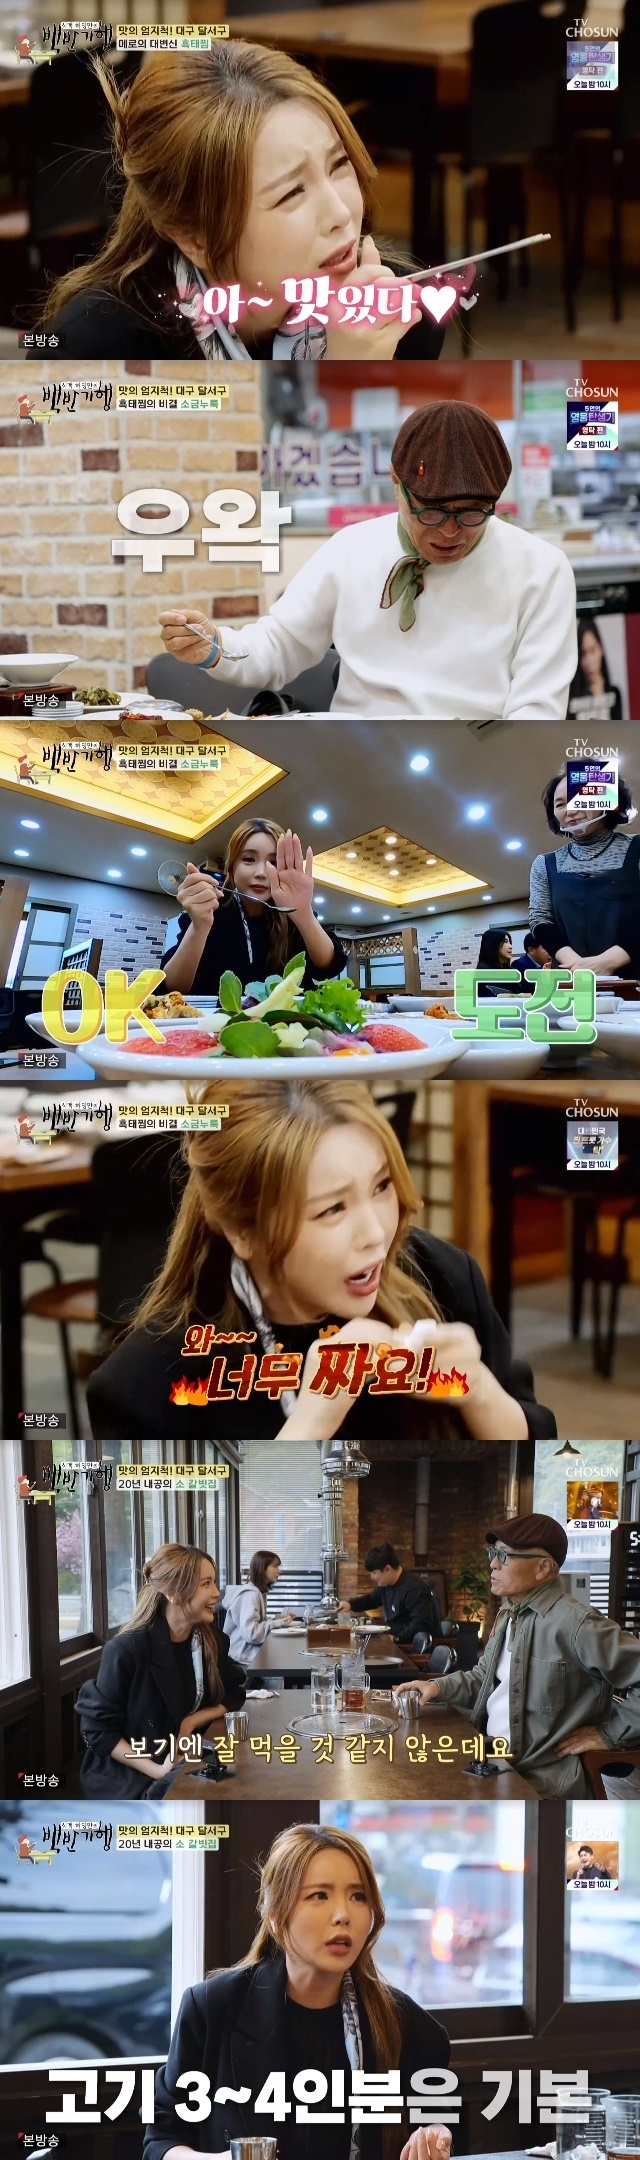 Singer Hong Jin-young showed off her anti-war gluttony side.Trot singer Hong Jin-young joined the table travelogue in Dalseo-gu, Deagu in the 199th episode of TV Chosun Huh Young Mans Food Travel (hereinafter Alumtravelogue) aired on May 5.Hong Jin-young said, I really wanted to meet Huh Young-man. I wanted to meet my teacher and eat delicious food. I really like what I eat.Actually Hong Jin-young showed a different taste by eating Deagu food afterwards.In particular, Hong Jin-young attracted attention with Huh Young-mans taste of salt yeast, which catches the fishy smell of Mero. The visual is like sikhye, but the taste is salty.Hong Jin-young laughed as he watched Huh Young-man as soon as he ate it and tried to taste it.Hong Jin-young also showed a special affection for meat, saying several times, I really like meat.Hong Jin-young, who emphasized, I like it so much, said Huh Young-man, But I do not think I will eat well at all. I used to eat three or four servings alone.On the same day, Hong Jin-young showed a very good picture of the child.Hong Jin-young, who was unable to take his eyes off somewhere while interviewing, soon stood up and said, I really like the baby. Then he went to another table guests child and said to the child, Aunt Peek-a-boo.Huh Young-man said, I can not be interviewed because I am distracted by you, but I could not hide my laughter.Hong Jin-young also boasted his hit song on this day, not only Battery of Love but also a lot of hits quietly. Living, Goodbye and Tonight were mentioned.Hong Jin-young said, When I started Trot, there werent that many people my age. I was a little lonely.Hong Jin-young, like the Queen of Event, told the event schedule of seven or eight days a day.Hong Jin-young said, It was too common for Japan to perform on a day-trip, and I ran to Danang (Vietnam) on a day-trip.